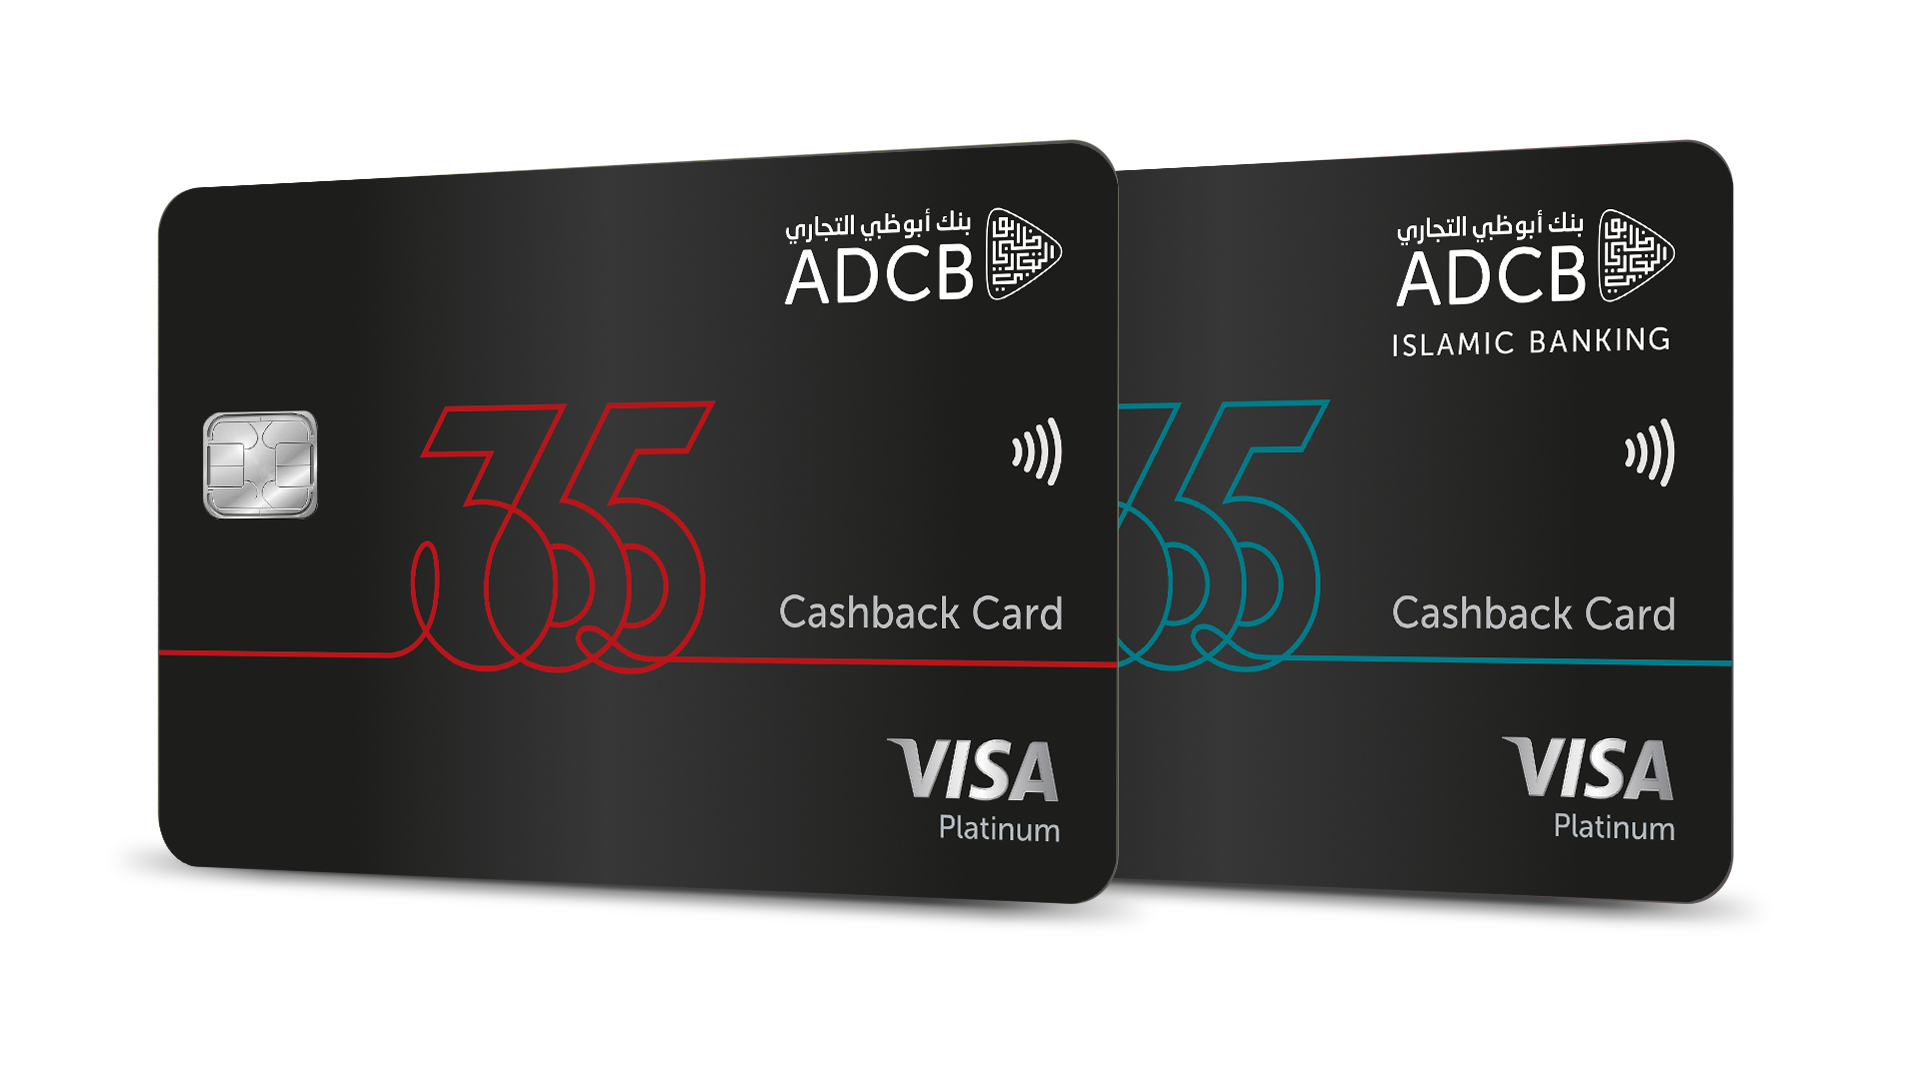 ADCB Introduces The New 365 Cashback Credit Card With Unparalleled Cashback And Lifestyle Benefits